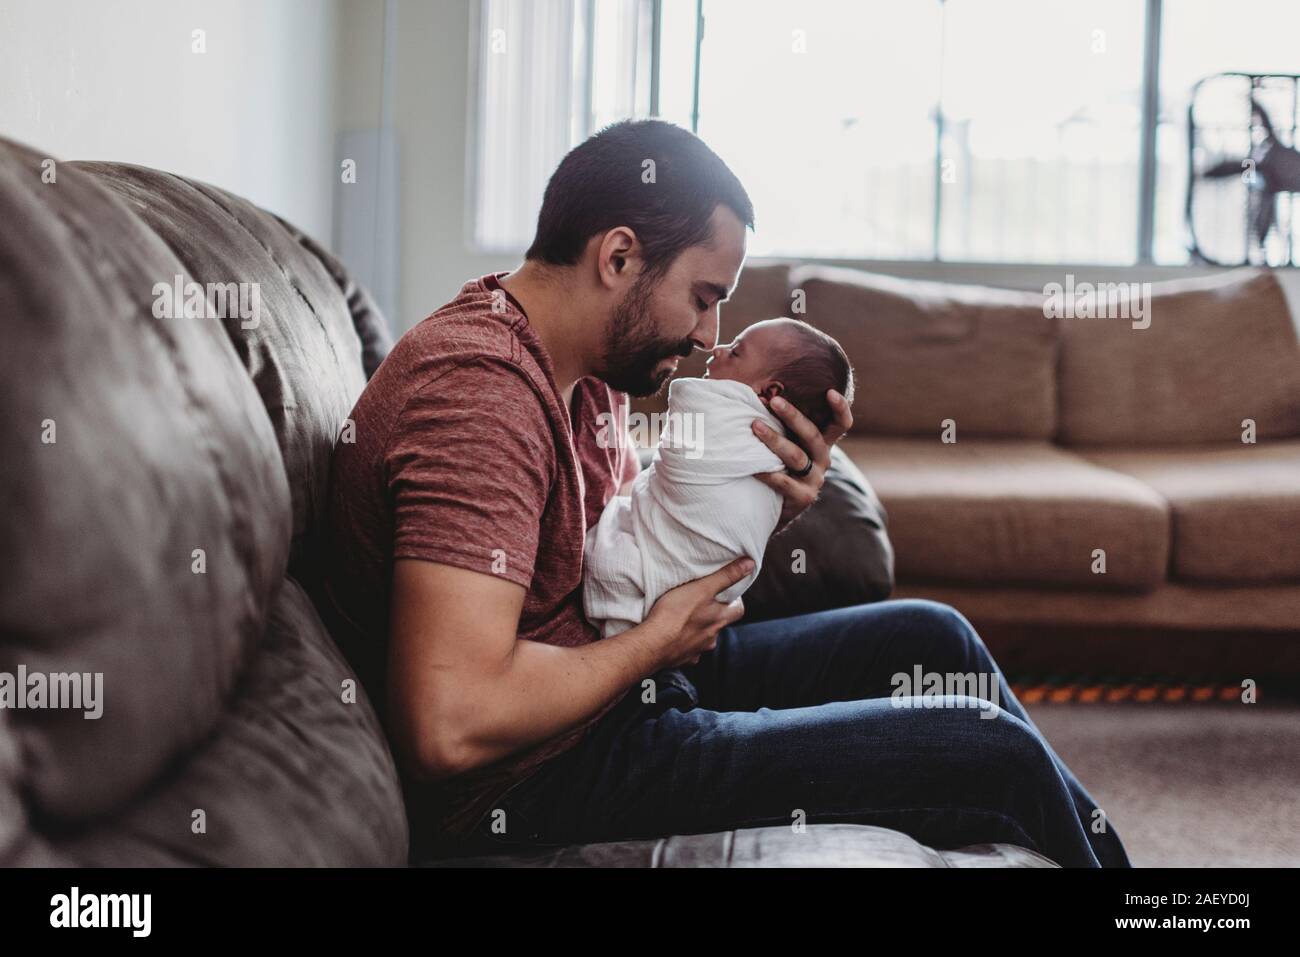 Bearded father bonding with newborn baby wrapped in white blanket Stock Photo